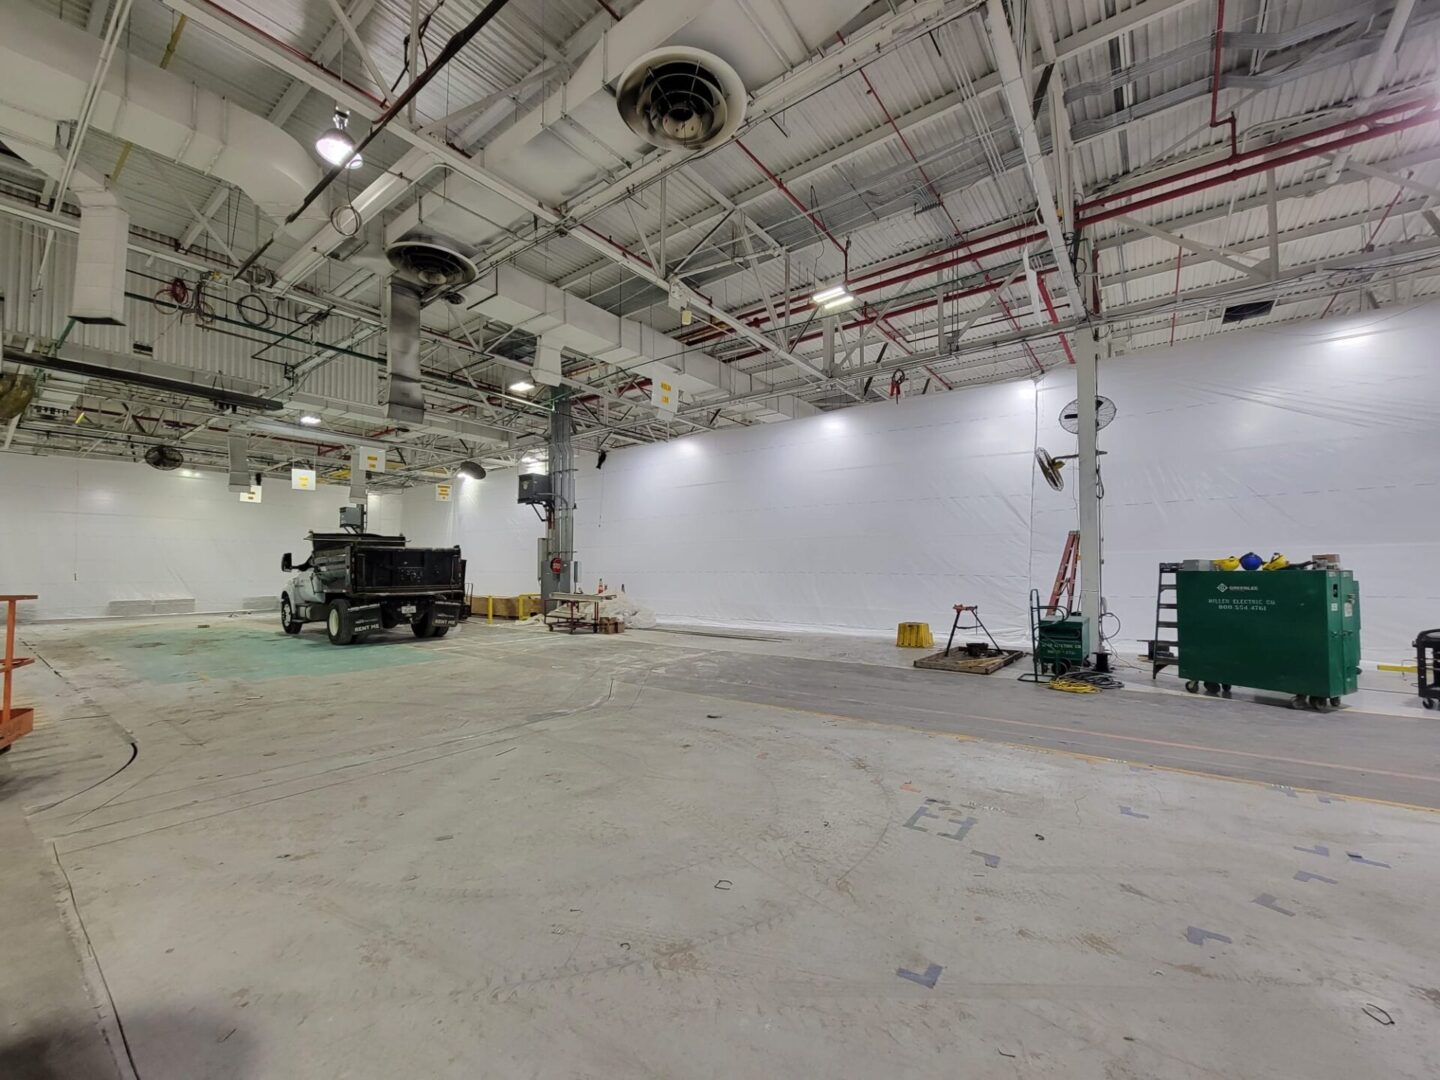 A large room with many construction equipment in it.